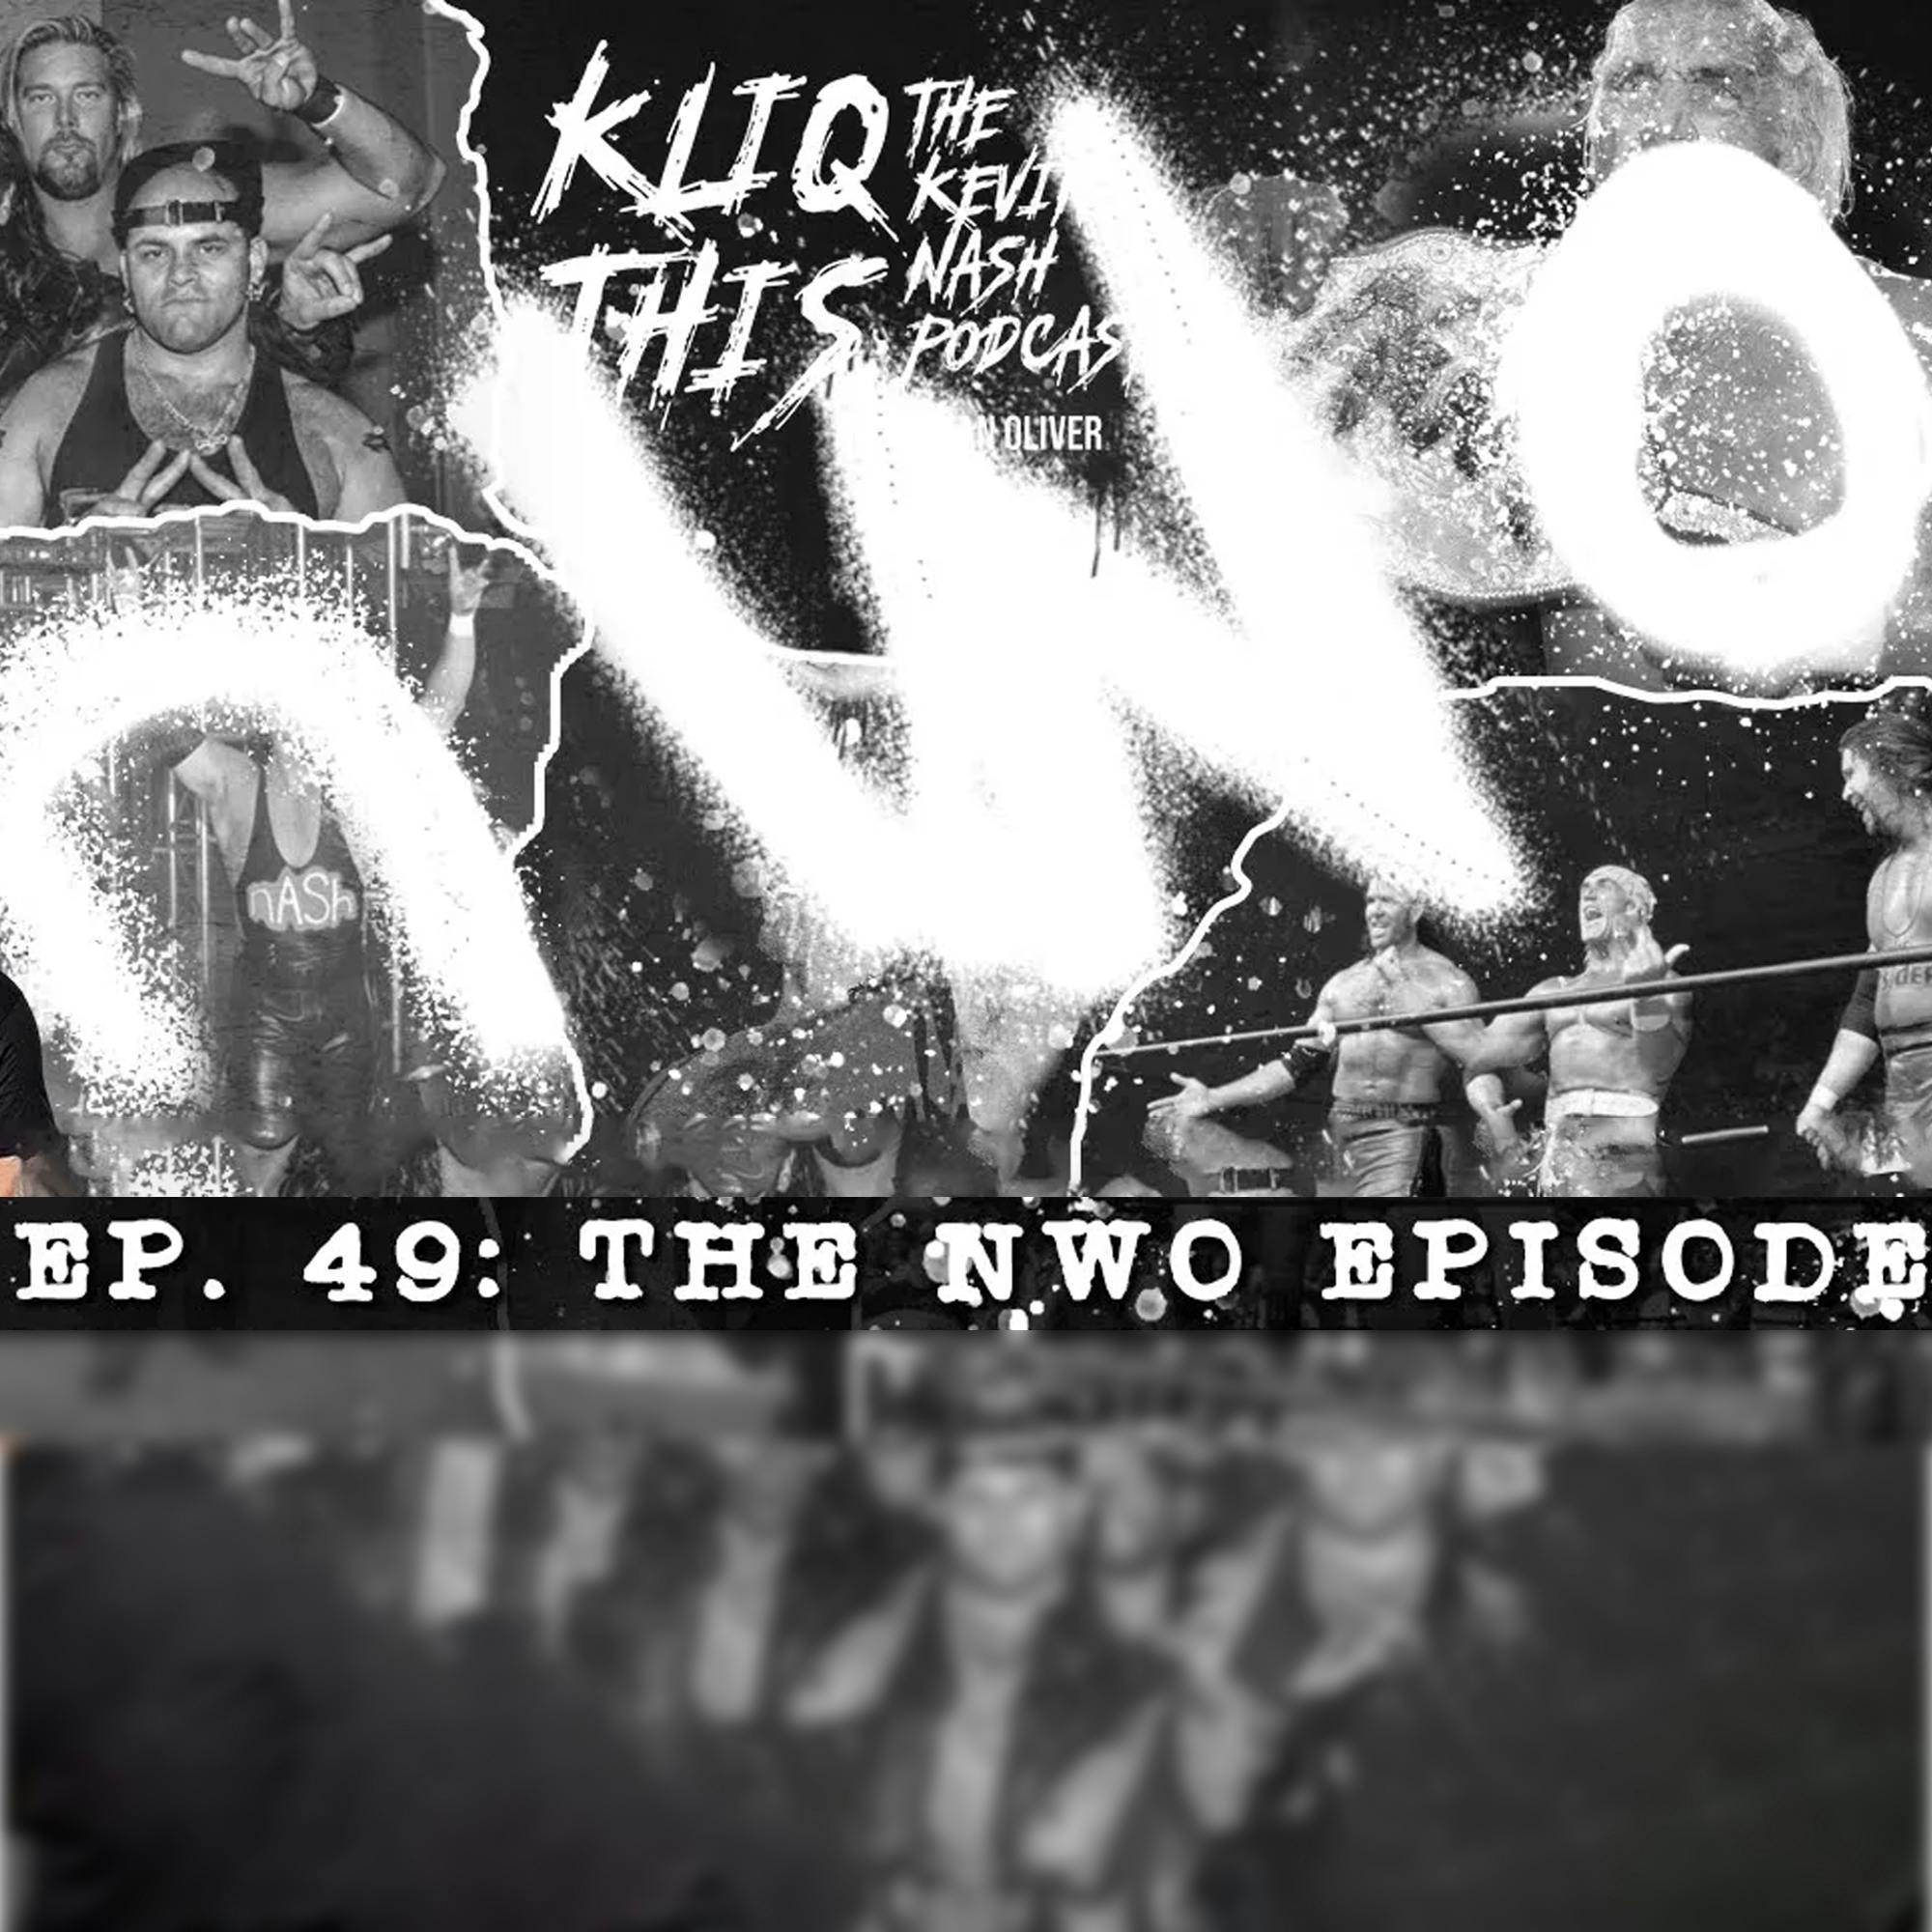 The NWO SPECIAL